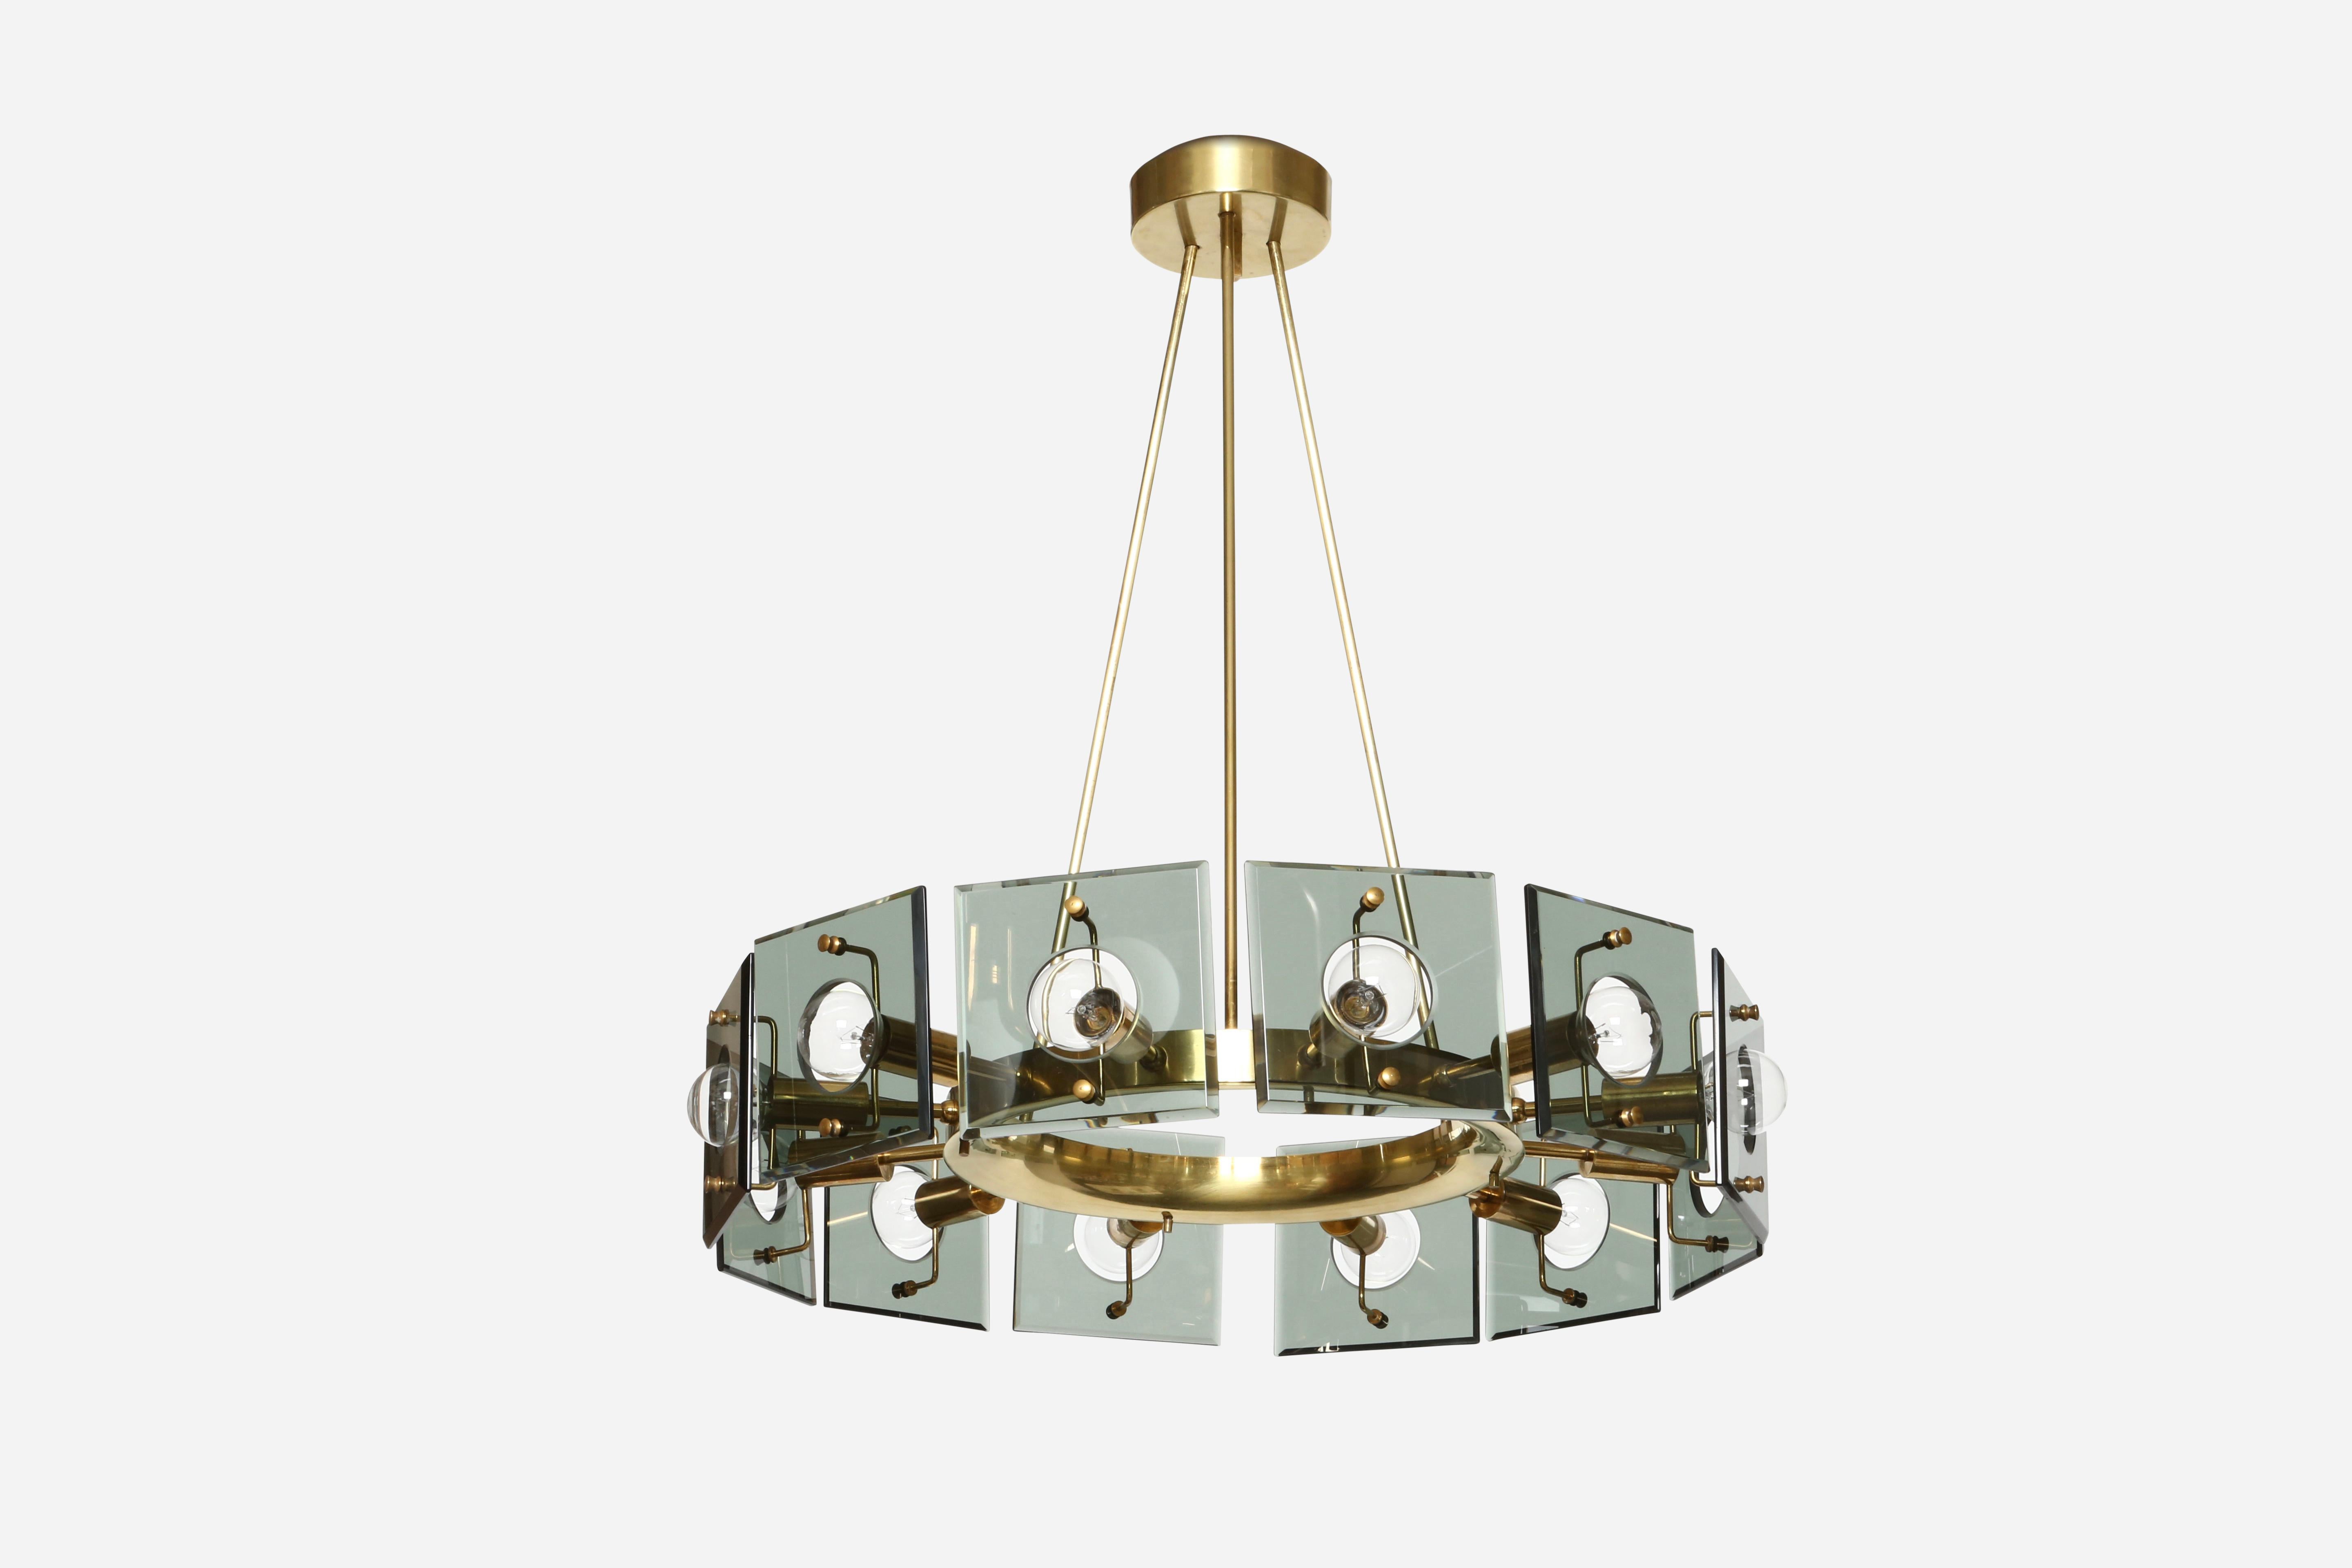 Chandelier by Gino Paroldo.
Designed and made in Italy in 1960s.
Brass frame and crystal glass.
12 Candelabra base sockets.
Complimentary US rewiring upon request.
Height adjustable, stems can be shortened.

We take pride in bringing vintage